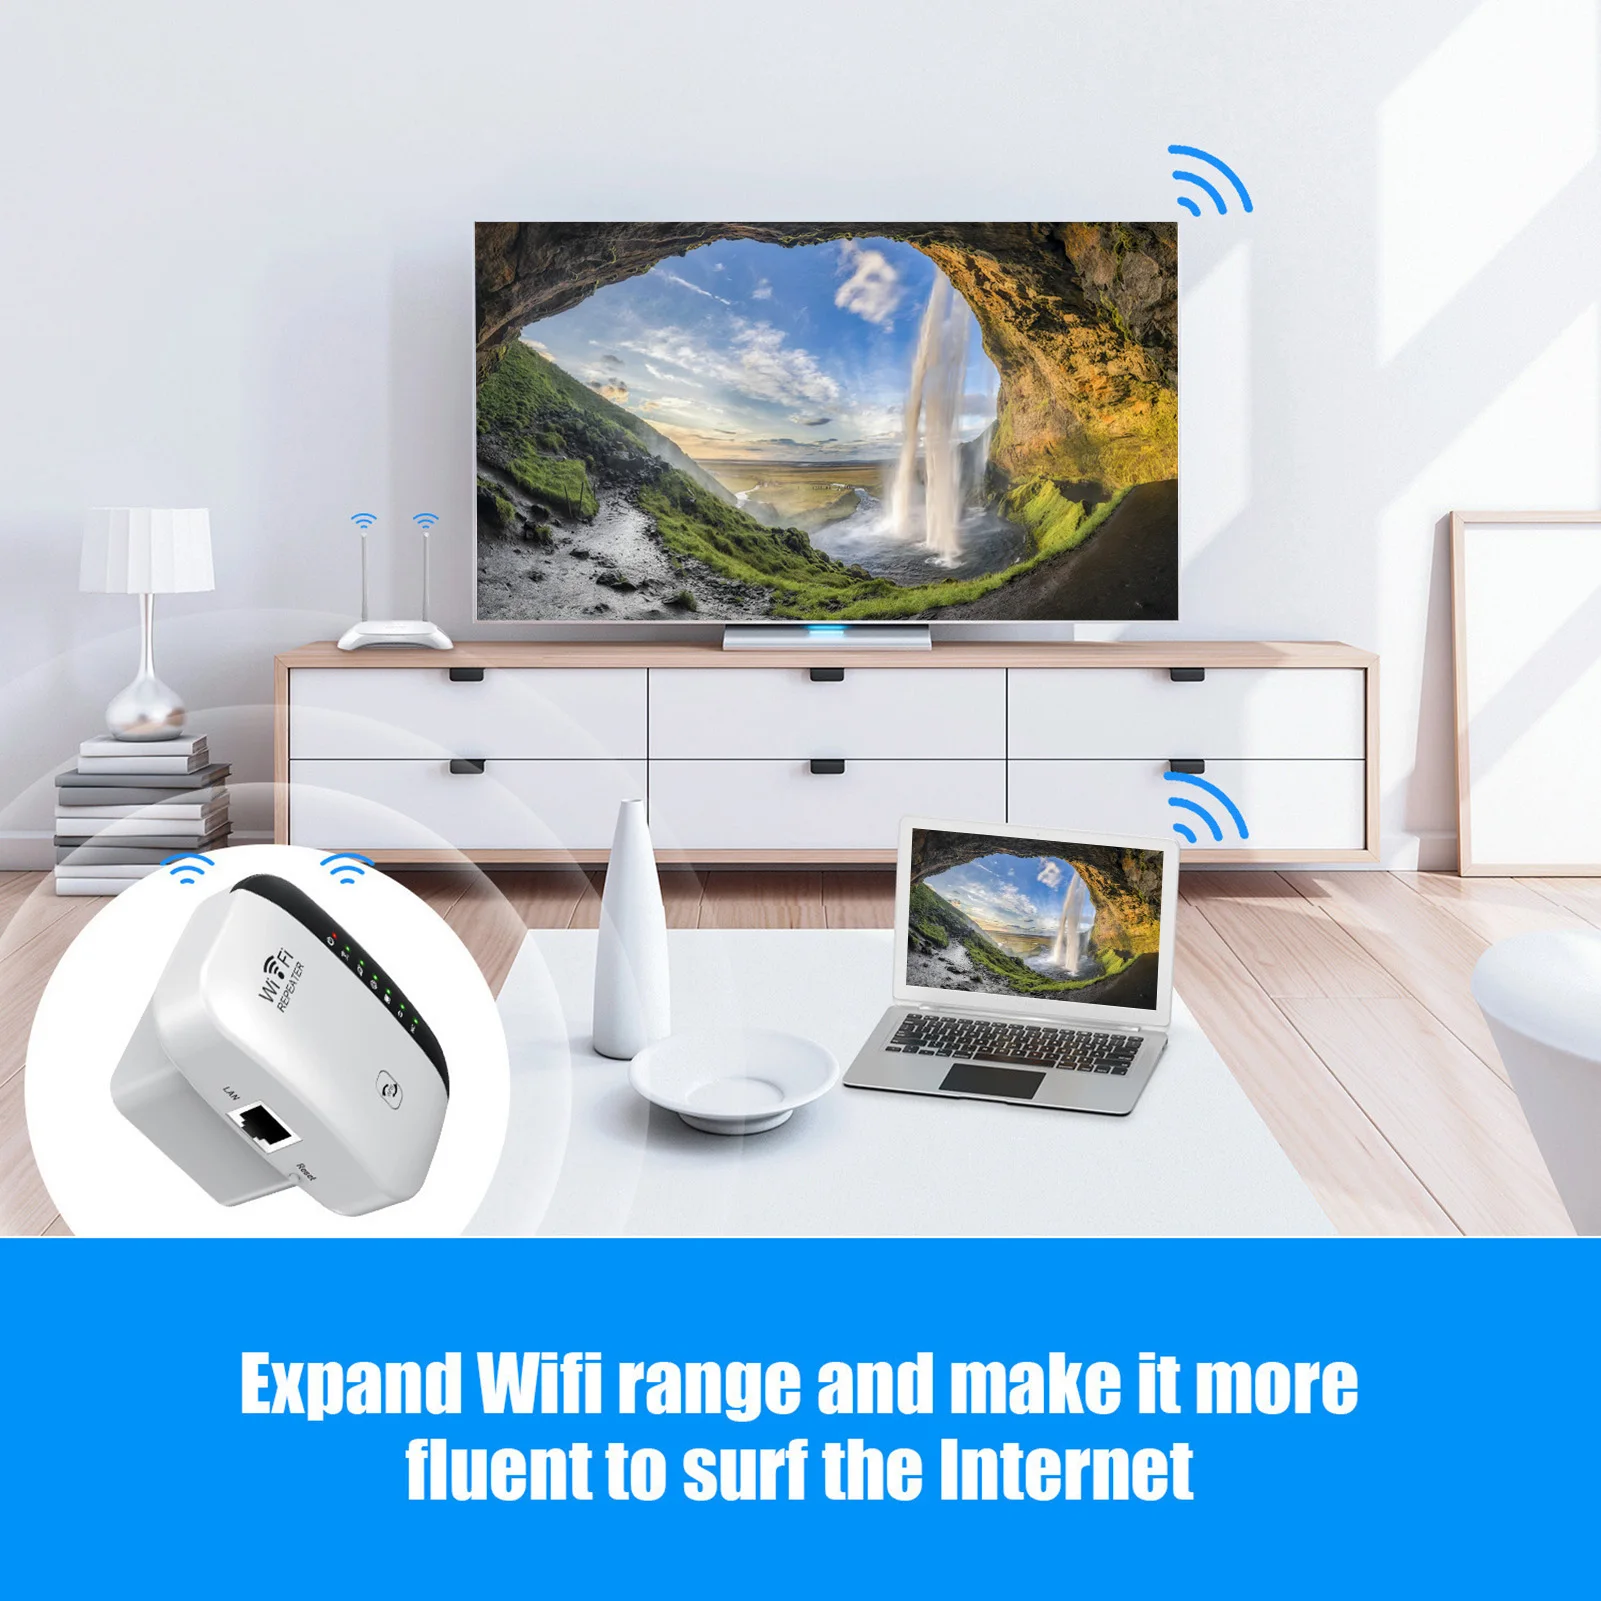 wifi range extender 2 4ghz 300mbps wifi repeater signal booster wireless network repeater wifi signal amplifier 300m router hot free global shipping